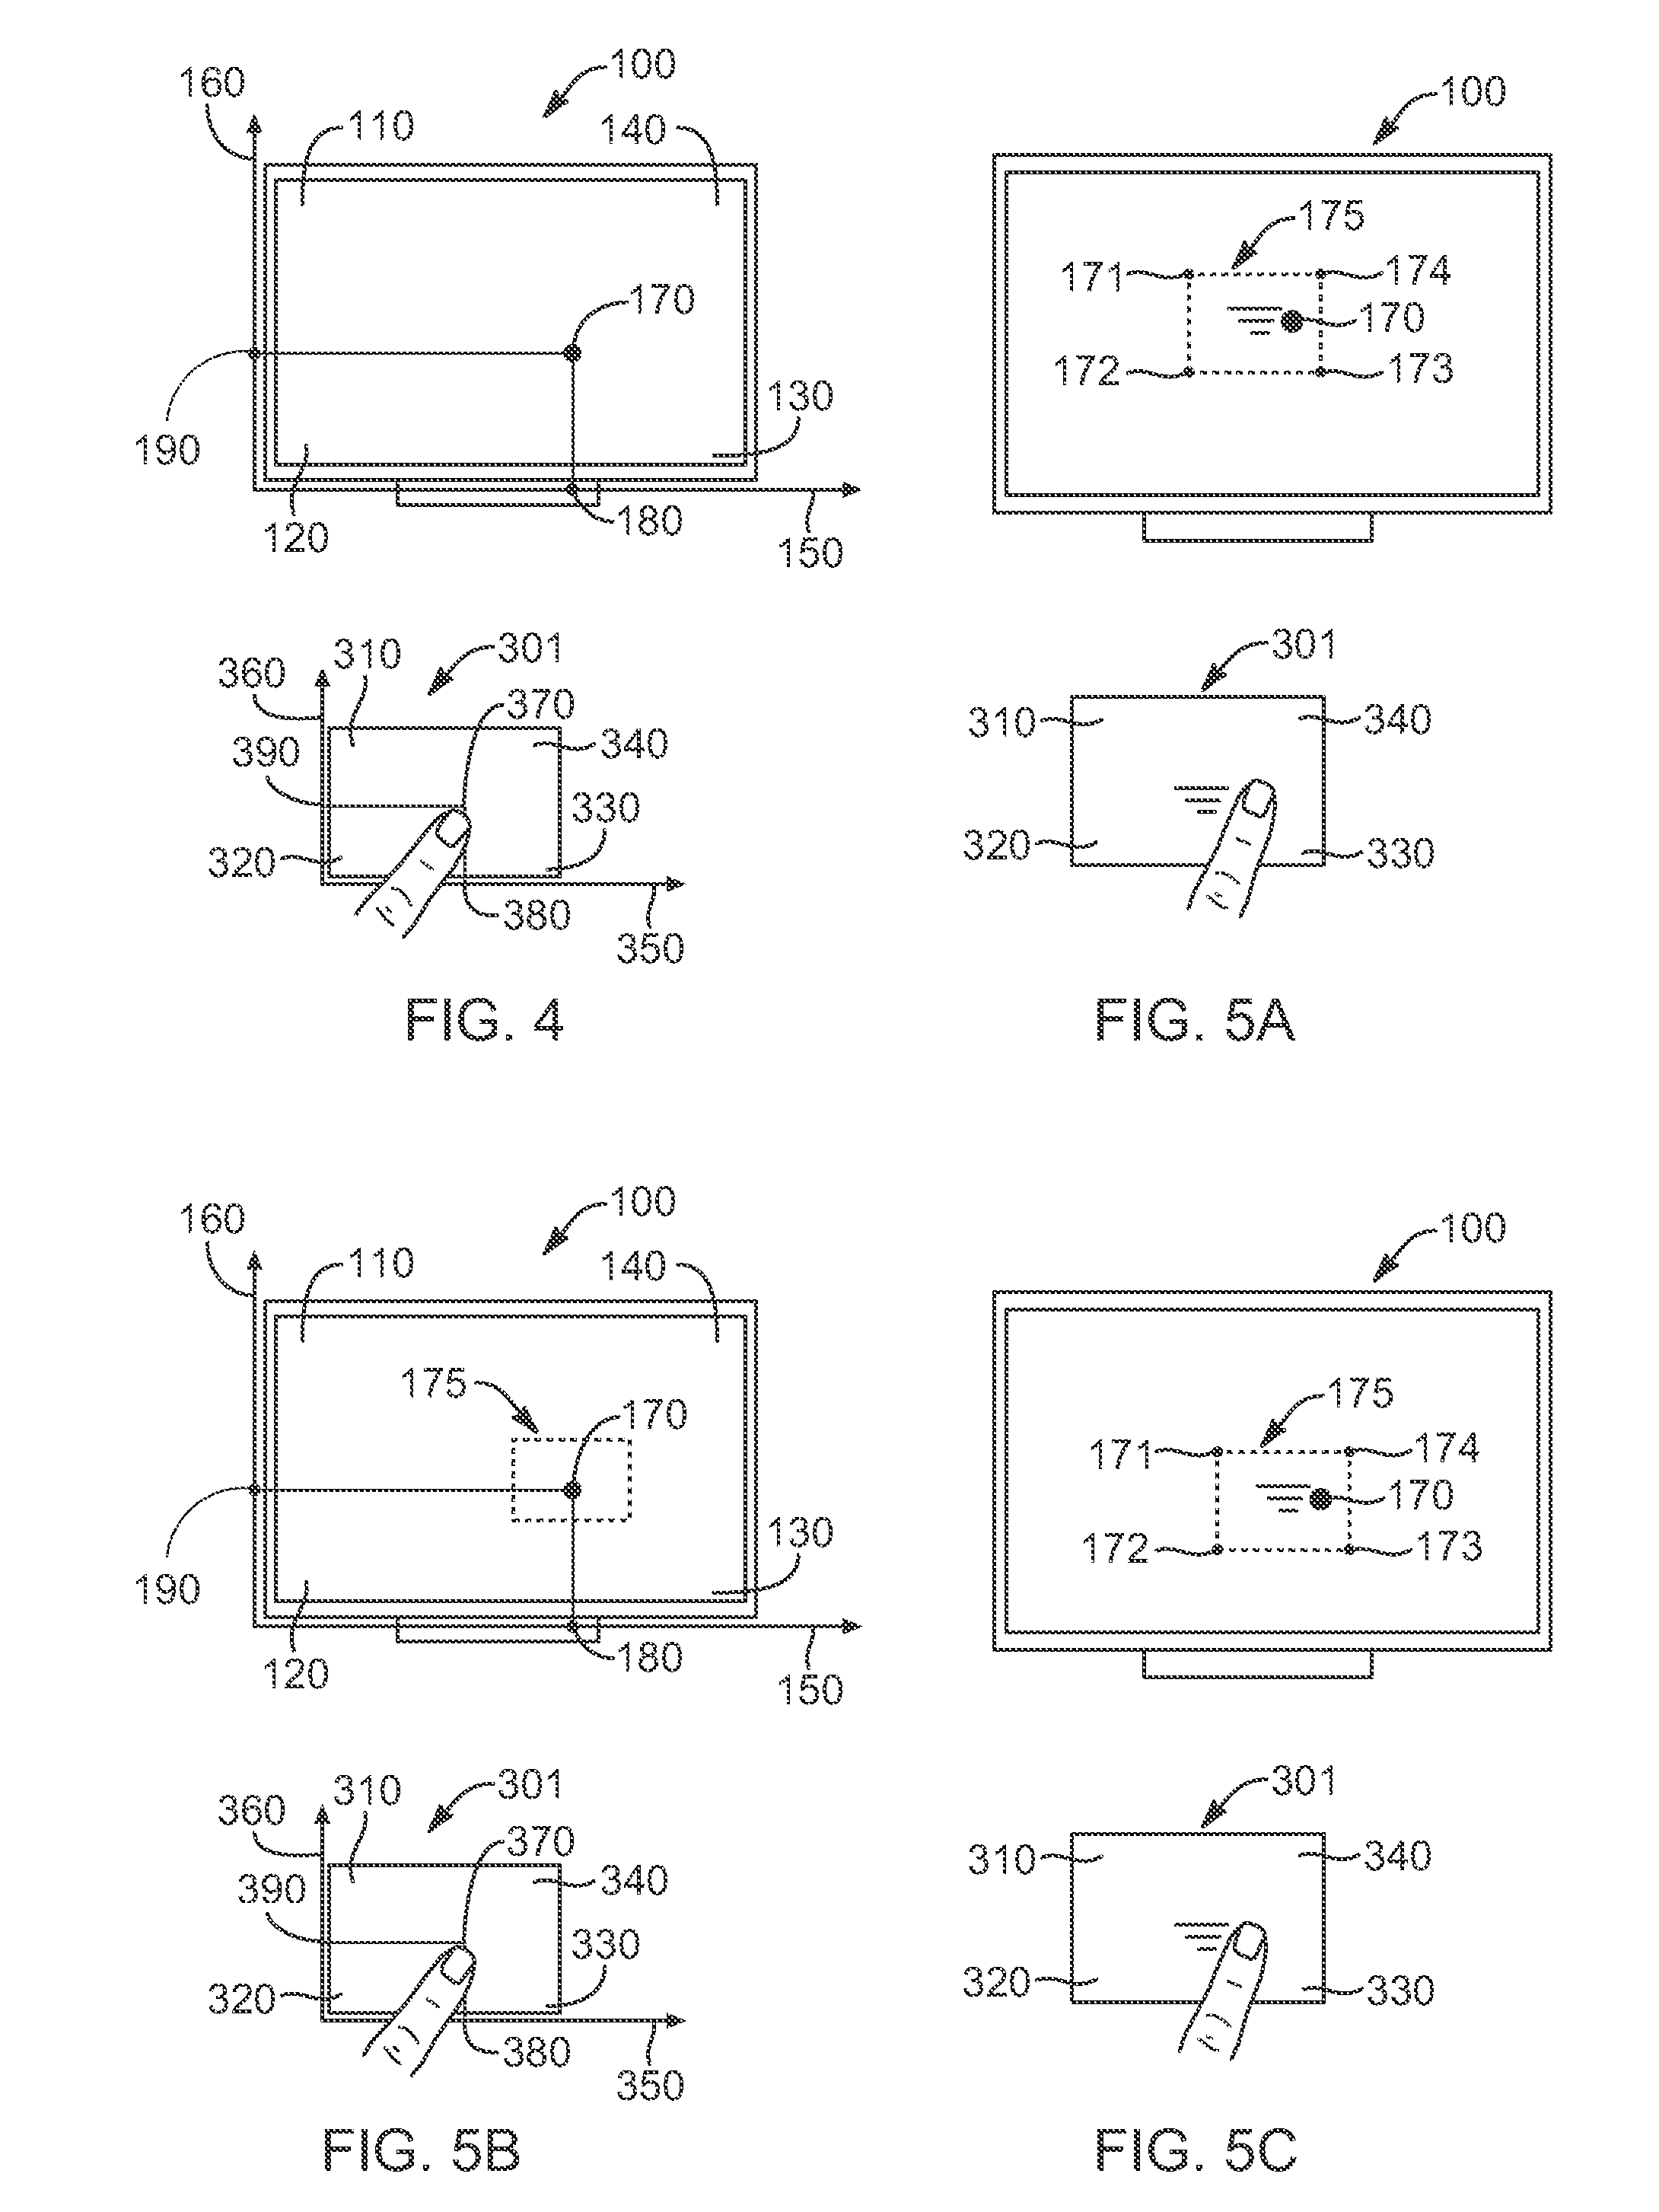 Multi-touch input apparatus and its interface method using hybrid resolution based touch data